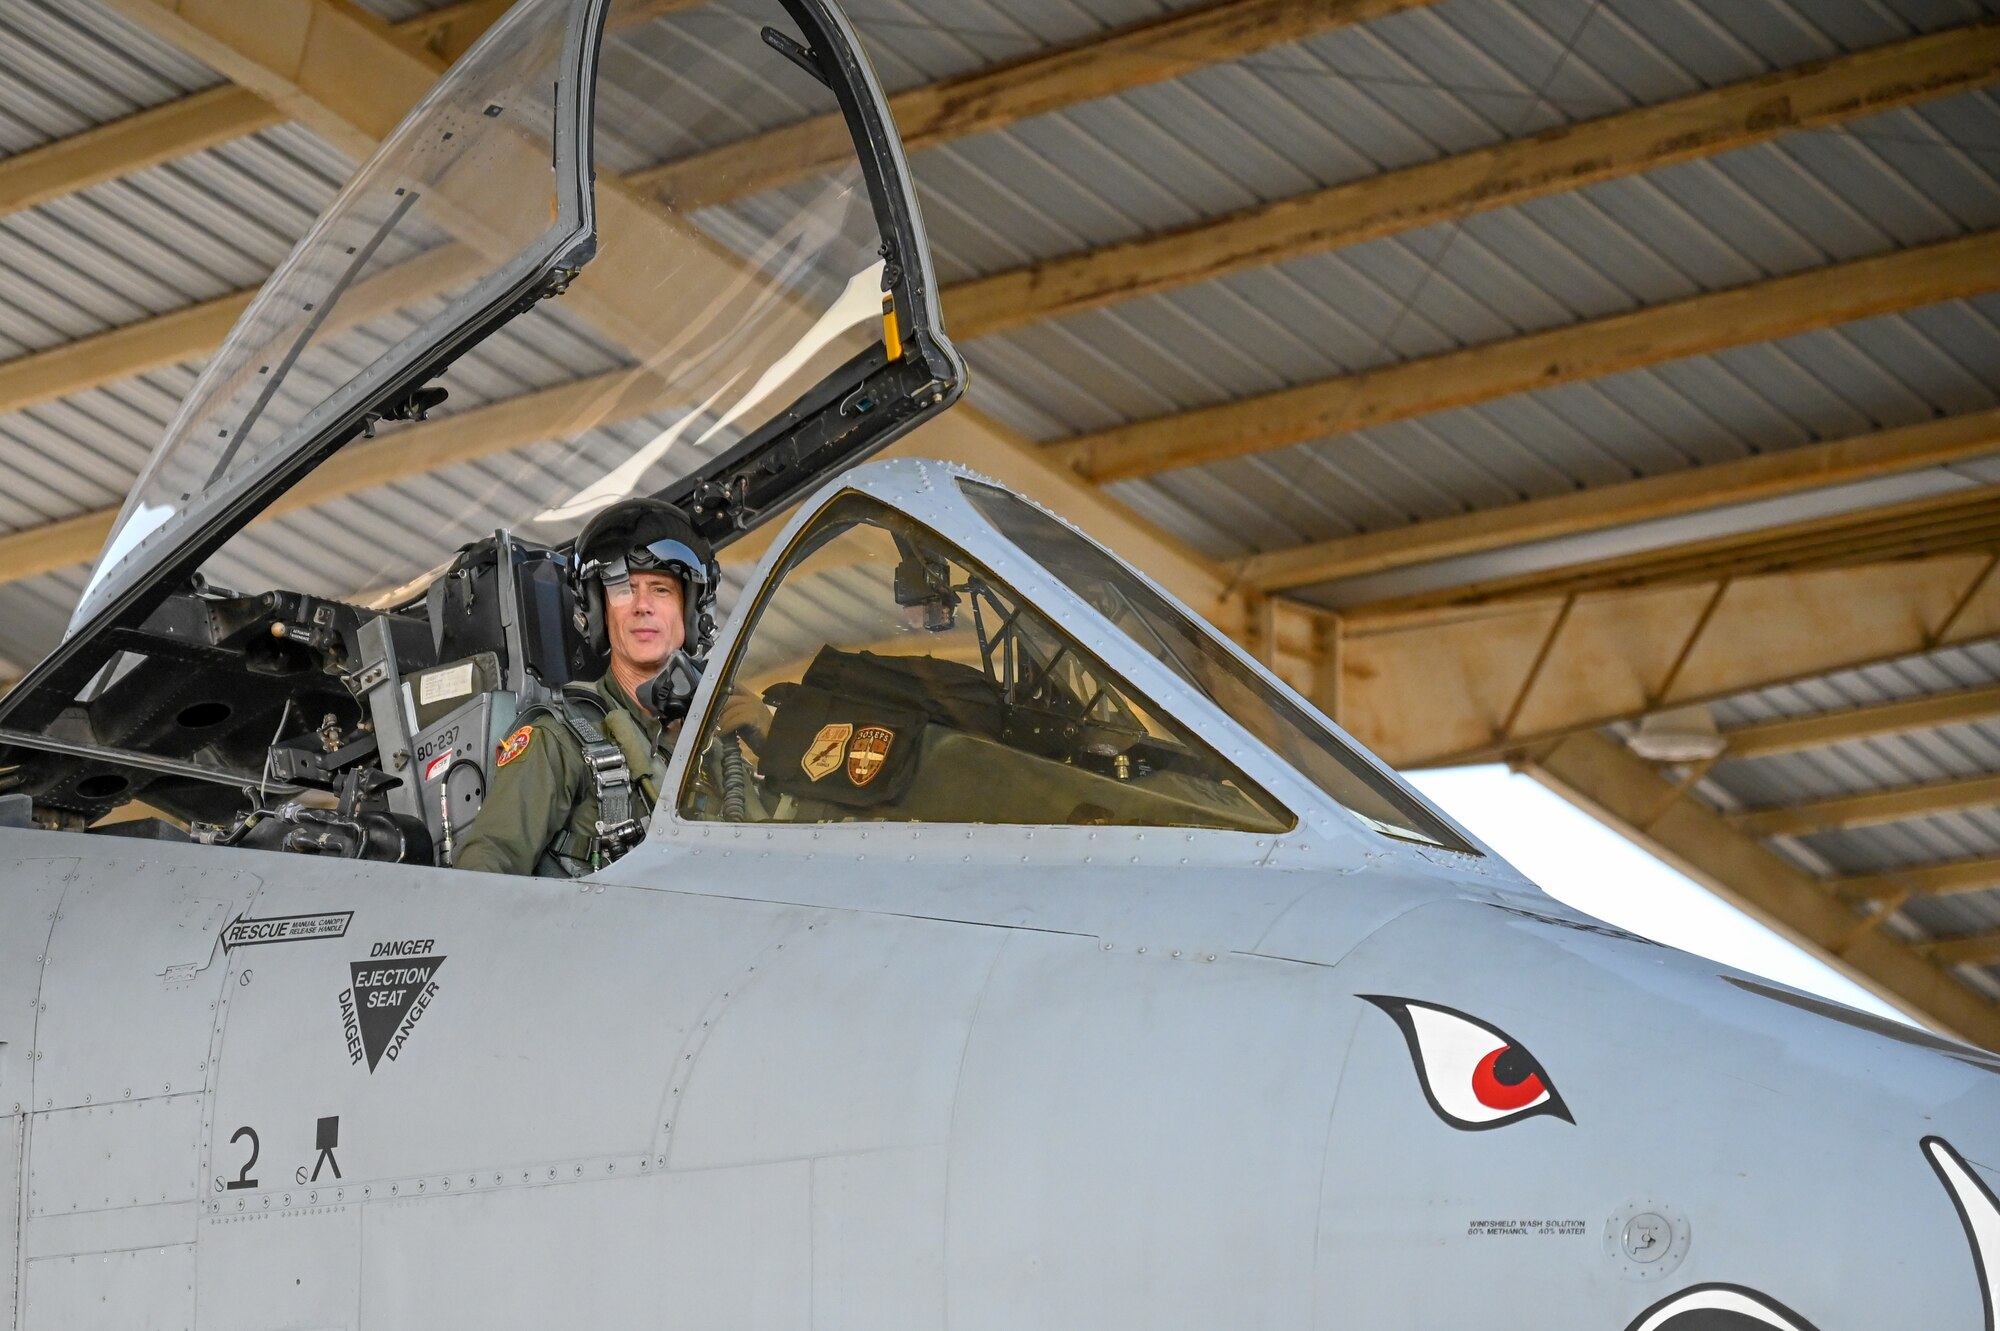 Lt. Col. John “Karl” Marks taxies in after completing 7,000 hours in the A-10C Thunderbolt II on Sept. 1, 2021 at Whiteman AFB, Mo. Marks is the highest hour A-10C pilot in history.